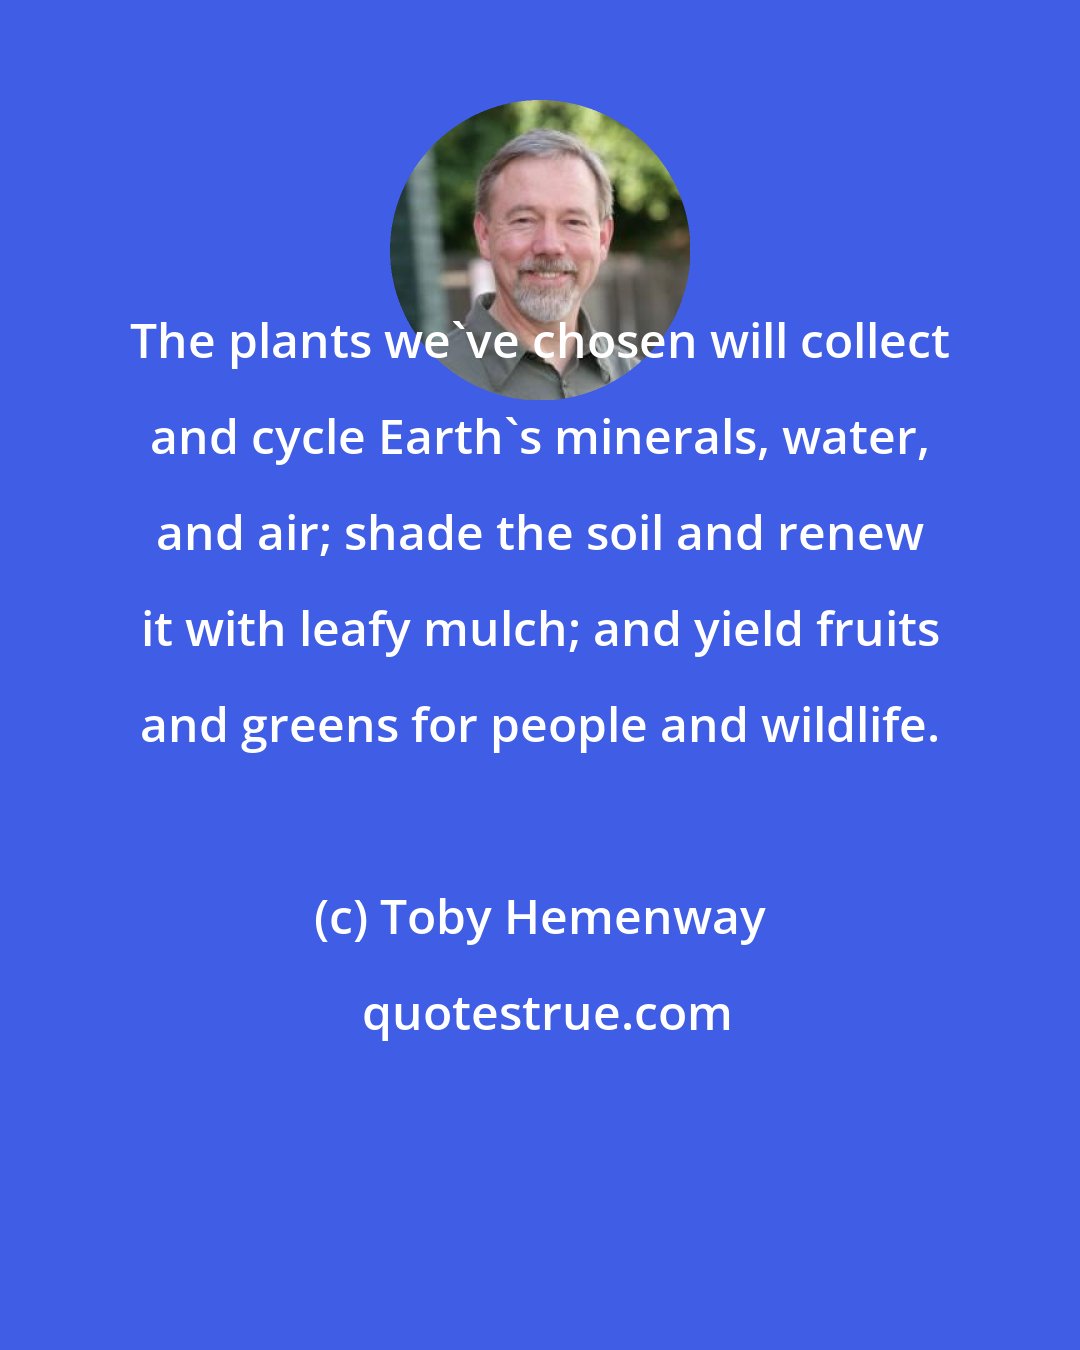 Toby Hemenway: The plants we've chosen will collect and cycle Earth's minerals, water, and air; shade the soil and renew it with leafy mulch; and yield fruits and greens for people and wildlife.